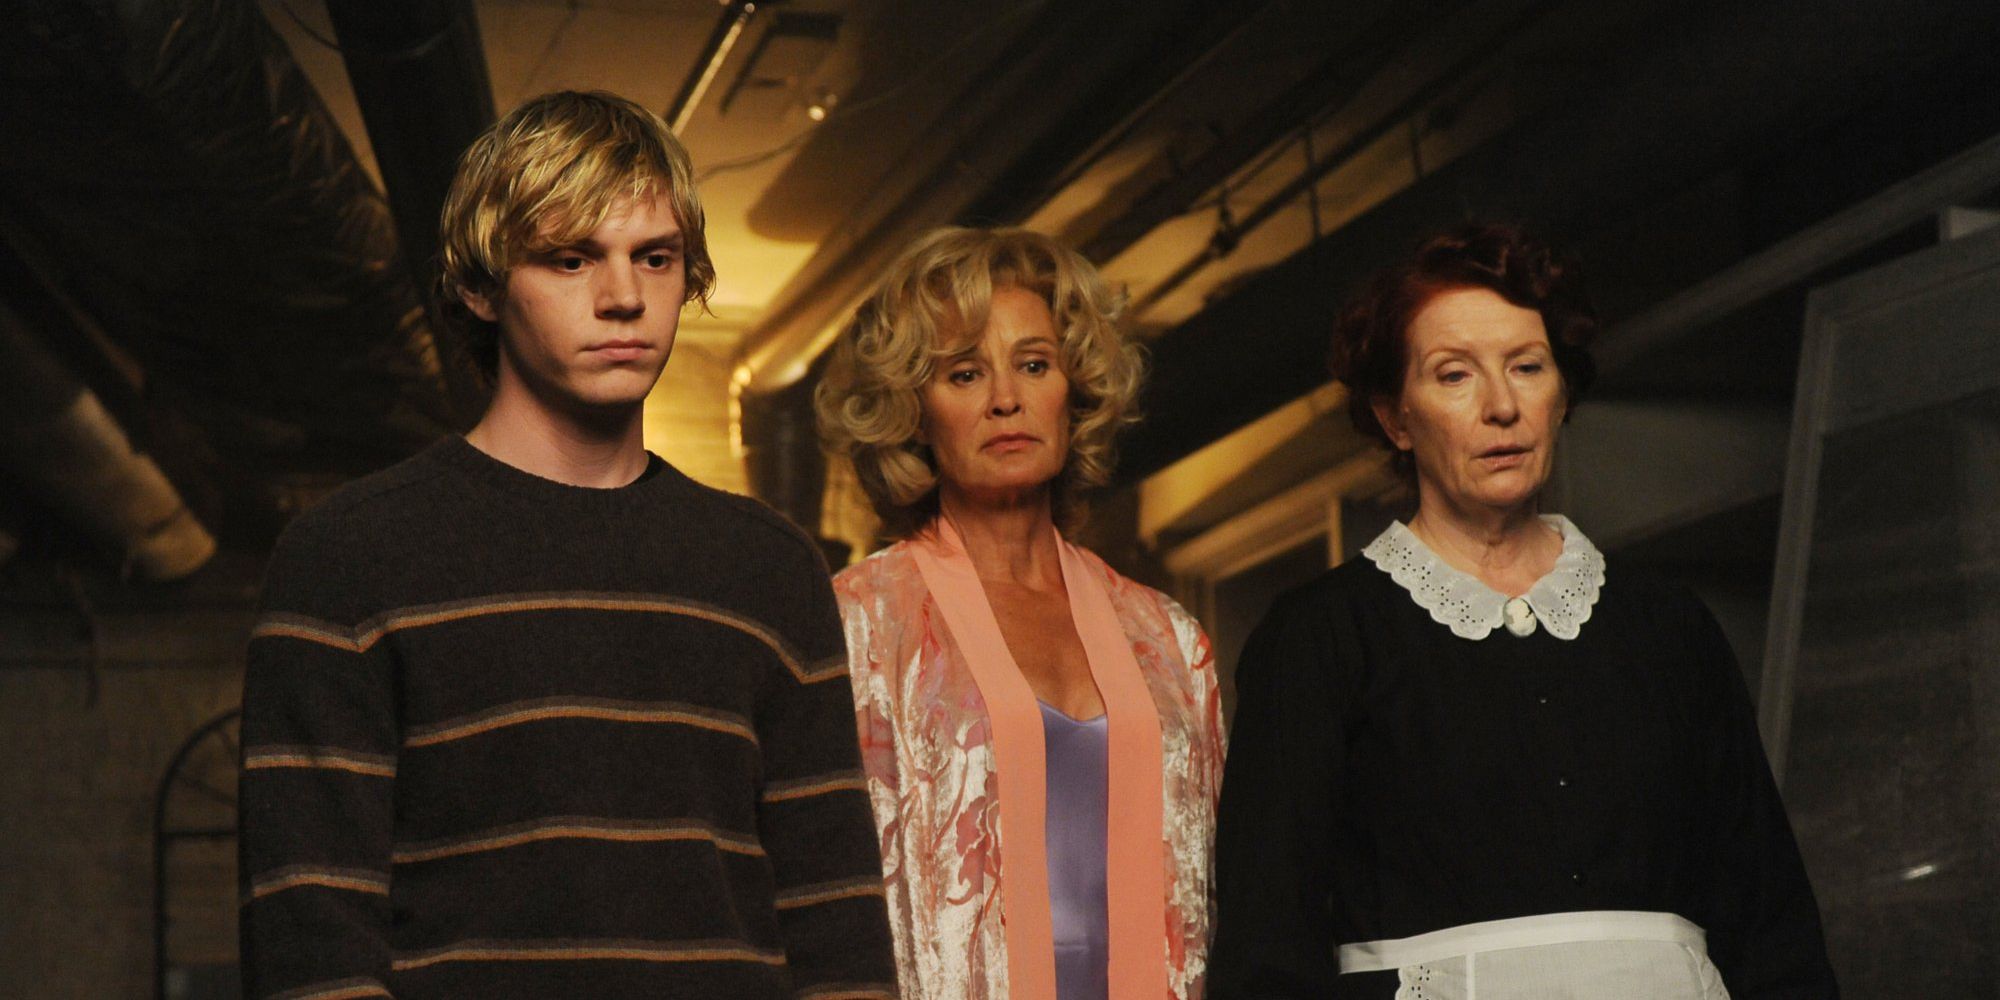 Tate, Constance, and Moira look at something in American Horror Story